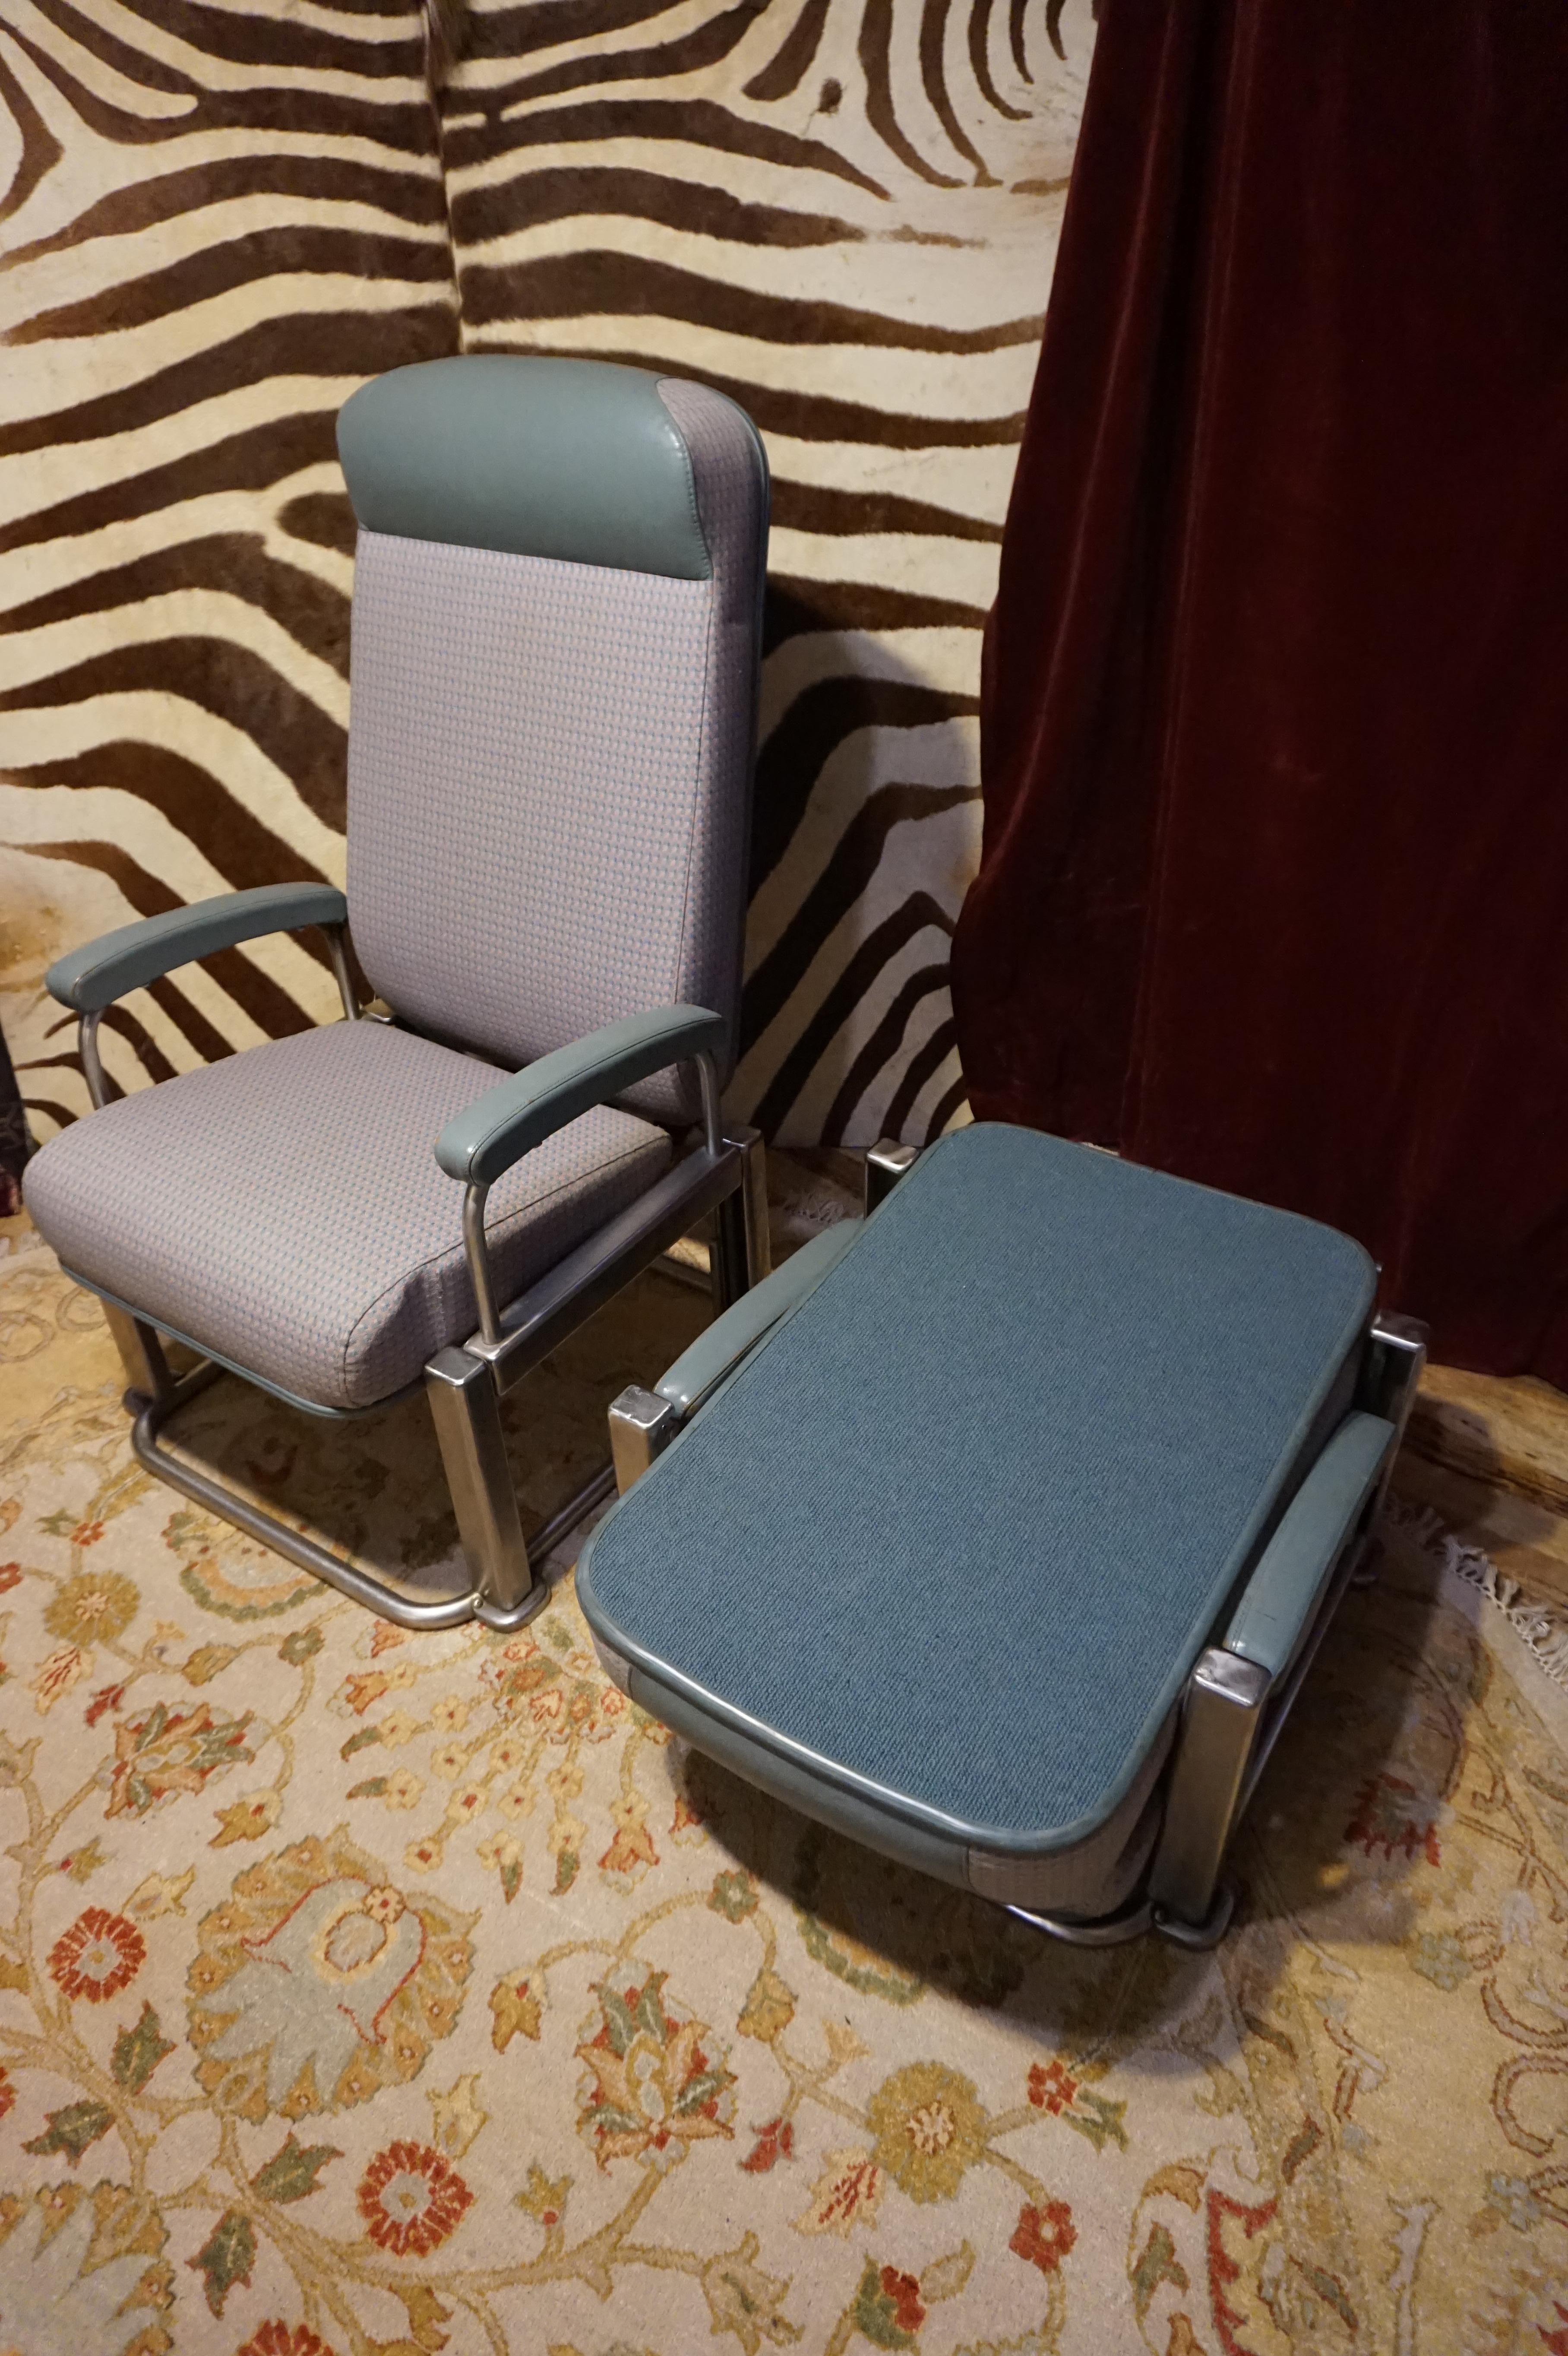 Rare Bauhaus inspired mid-century folding chairs in excellent condition. Originally used in 1st class compartments as lounge chairs that could be folded and tucked away (as demonstrated in photos). Mohair upholstery piped with leather. Steel and